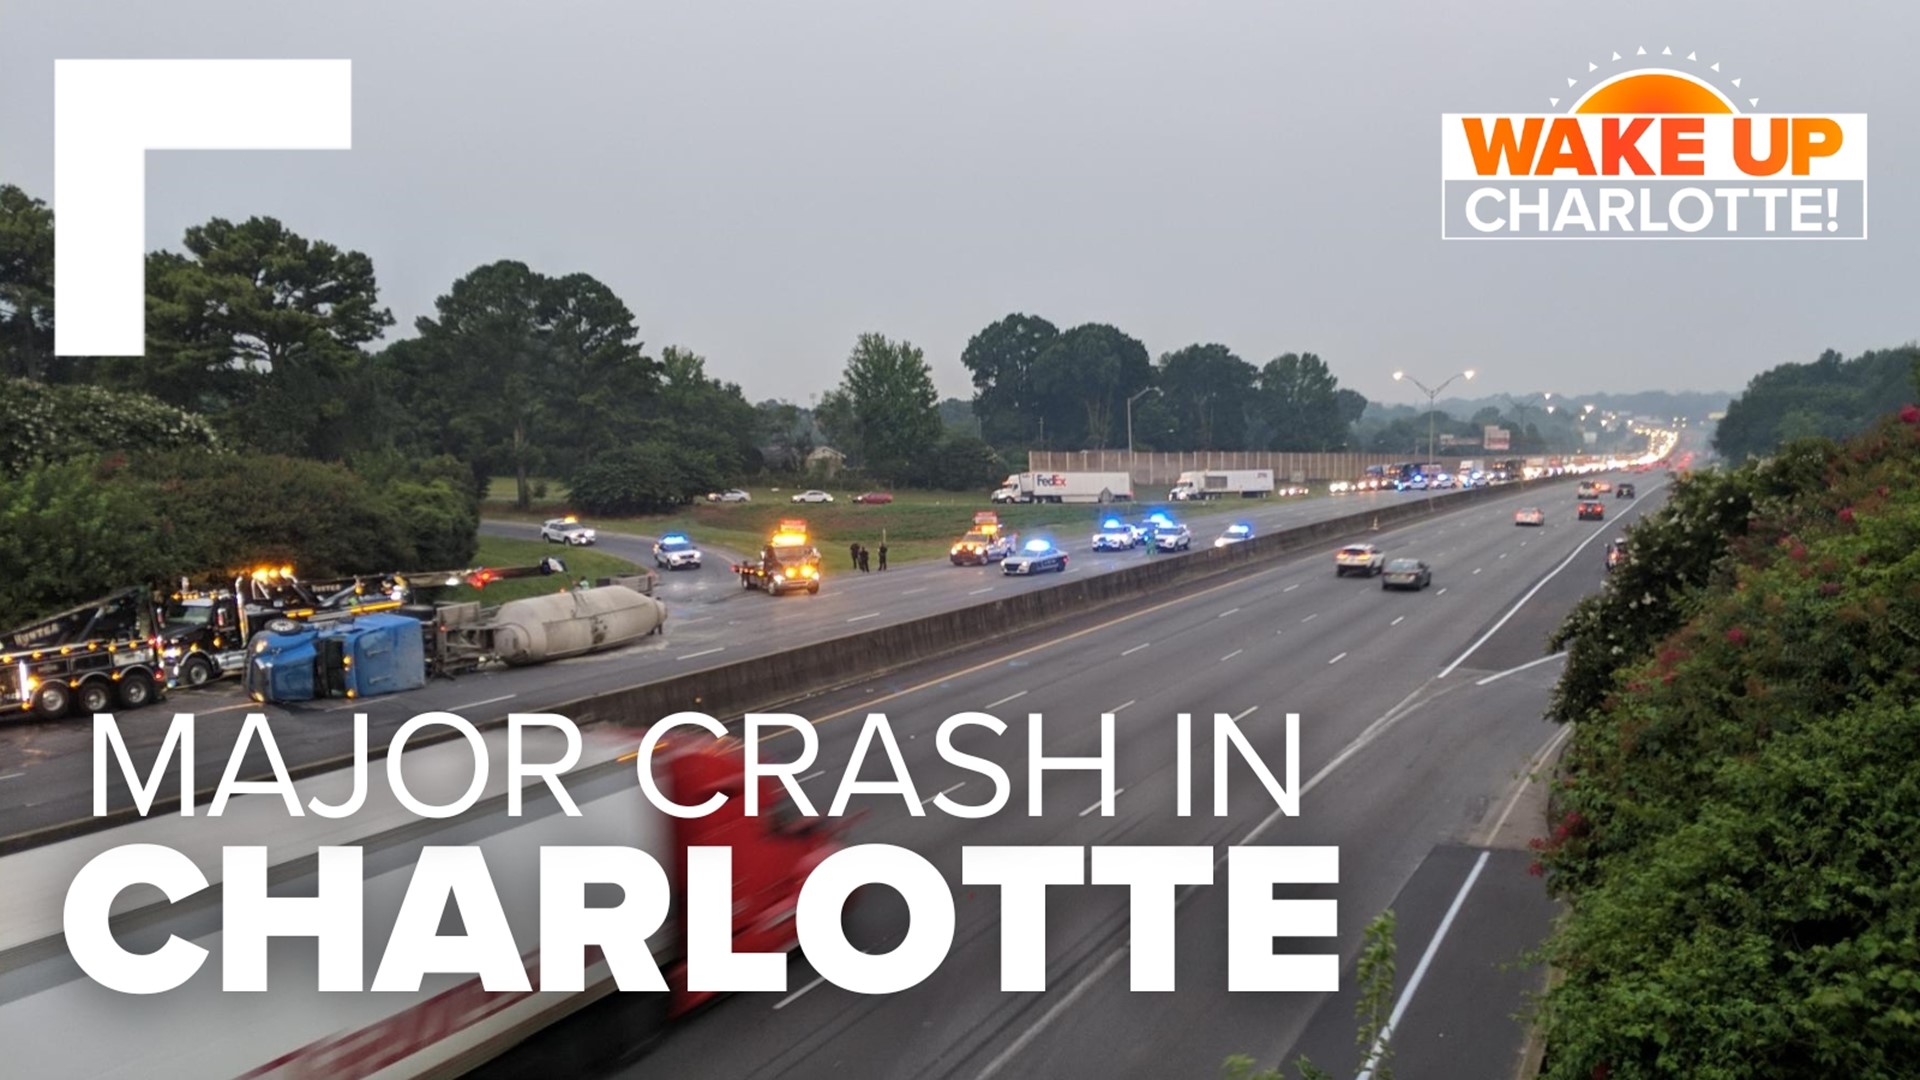 NCDOT said I-85 North is expected to be closed until 8:00 a.m.